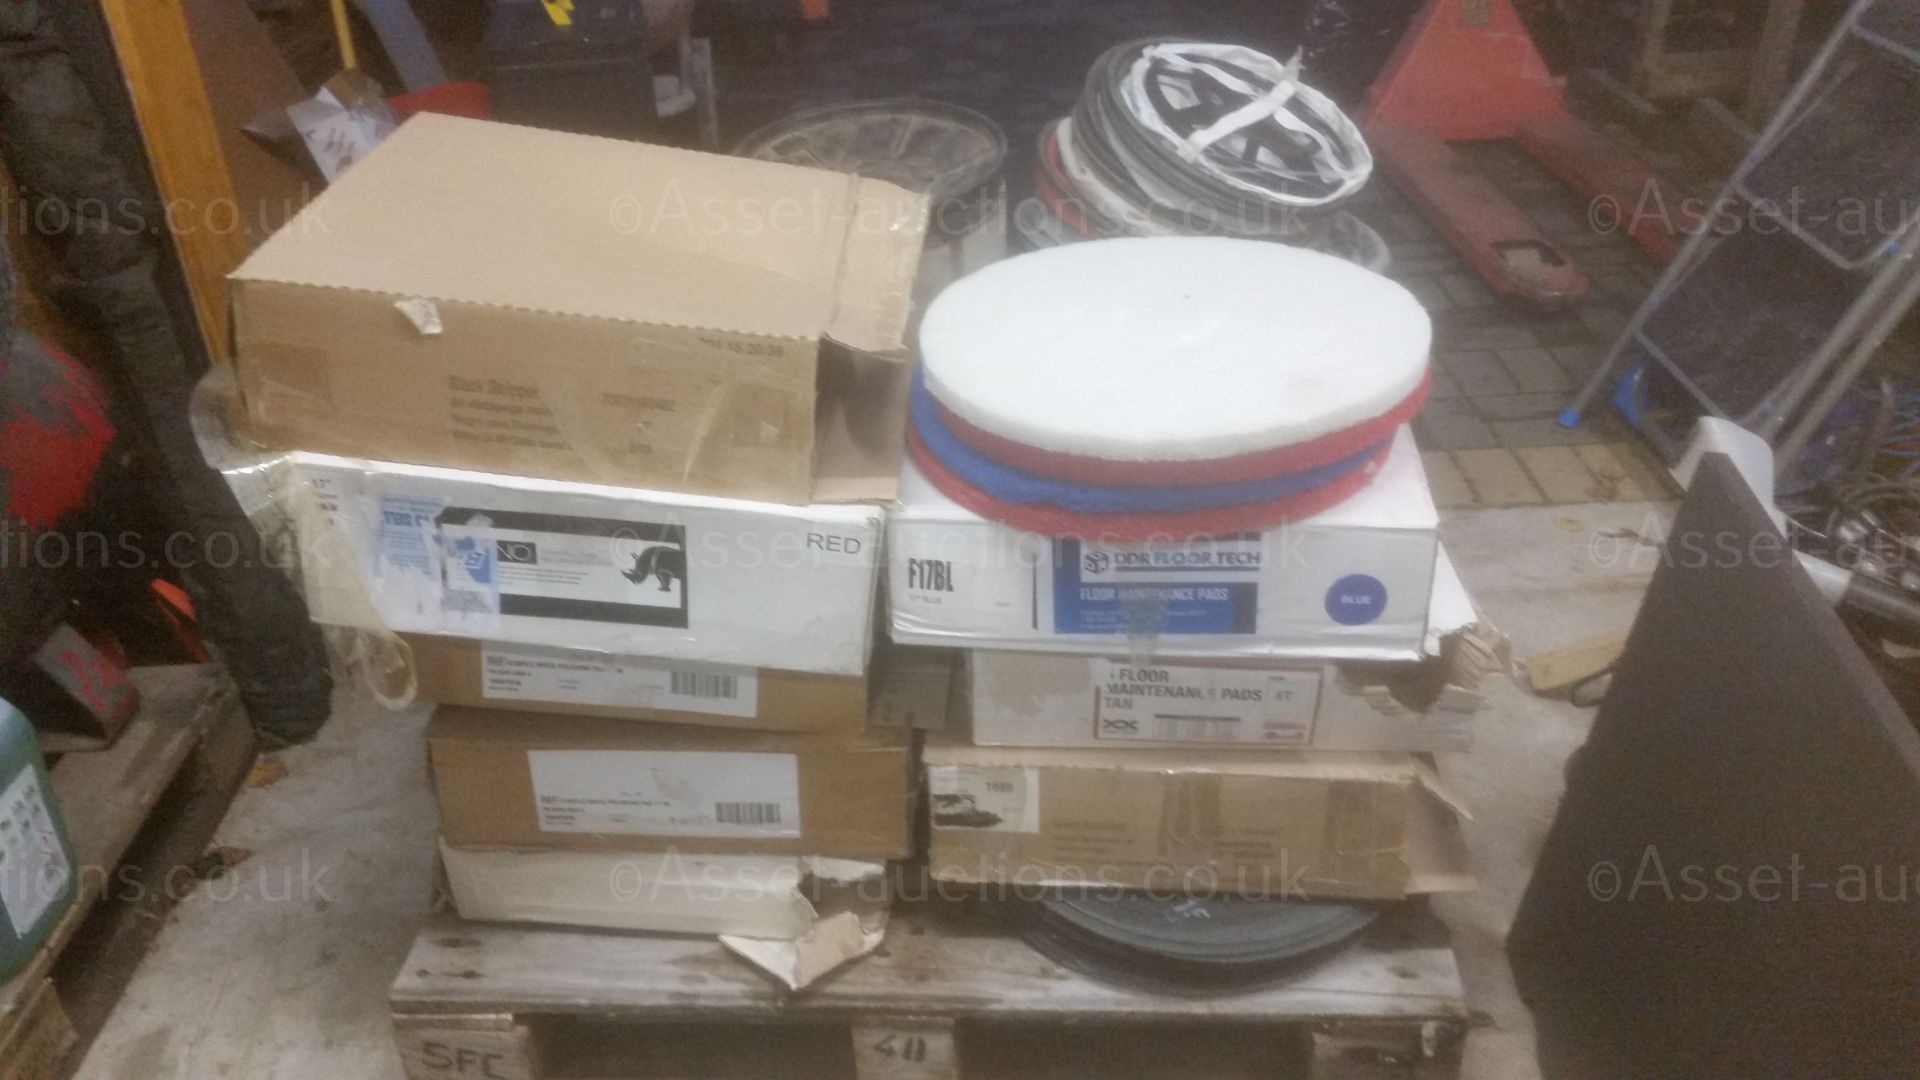 PALLET OF FLOOR SRUBBER ATTACMENTS, BUFFING PADS, SANDING DISCS, BRUSHES, HENRY VACUUM SPARES ETC - Image 2 of 22